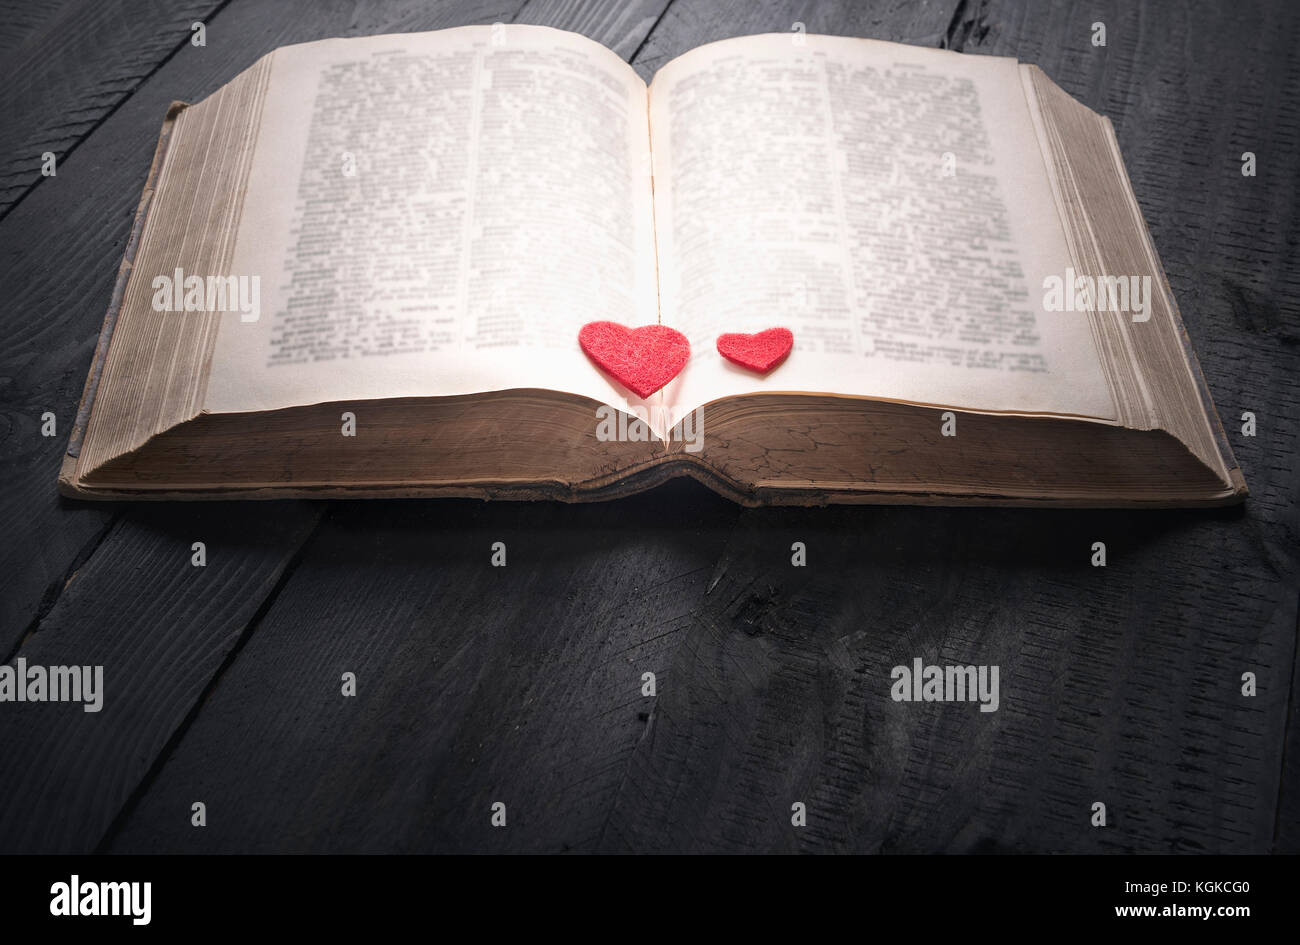 Antique open book with two red hearts on its pages, sitting on a black wooden background. A concept for the love of reading, learning, education or as Stock Photo